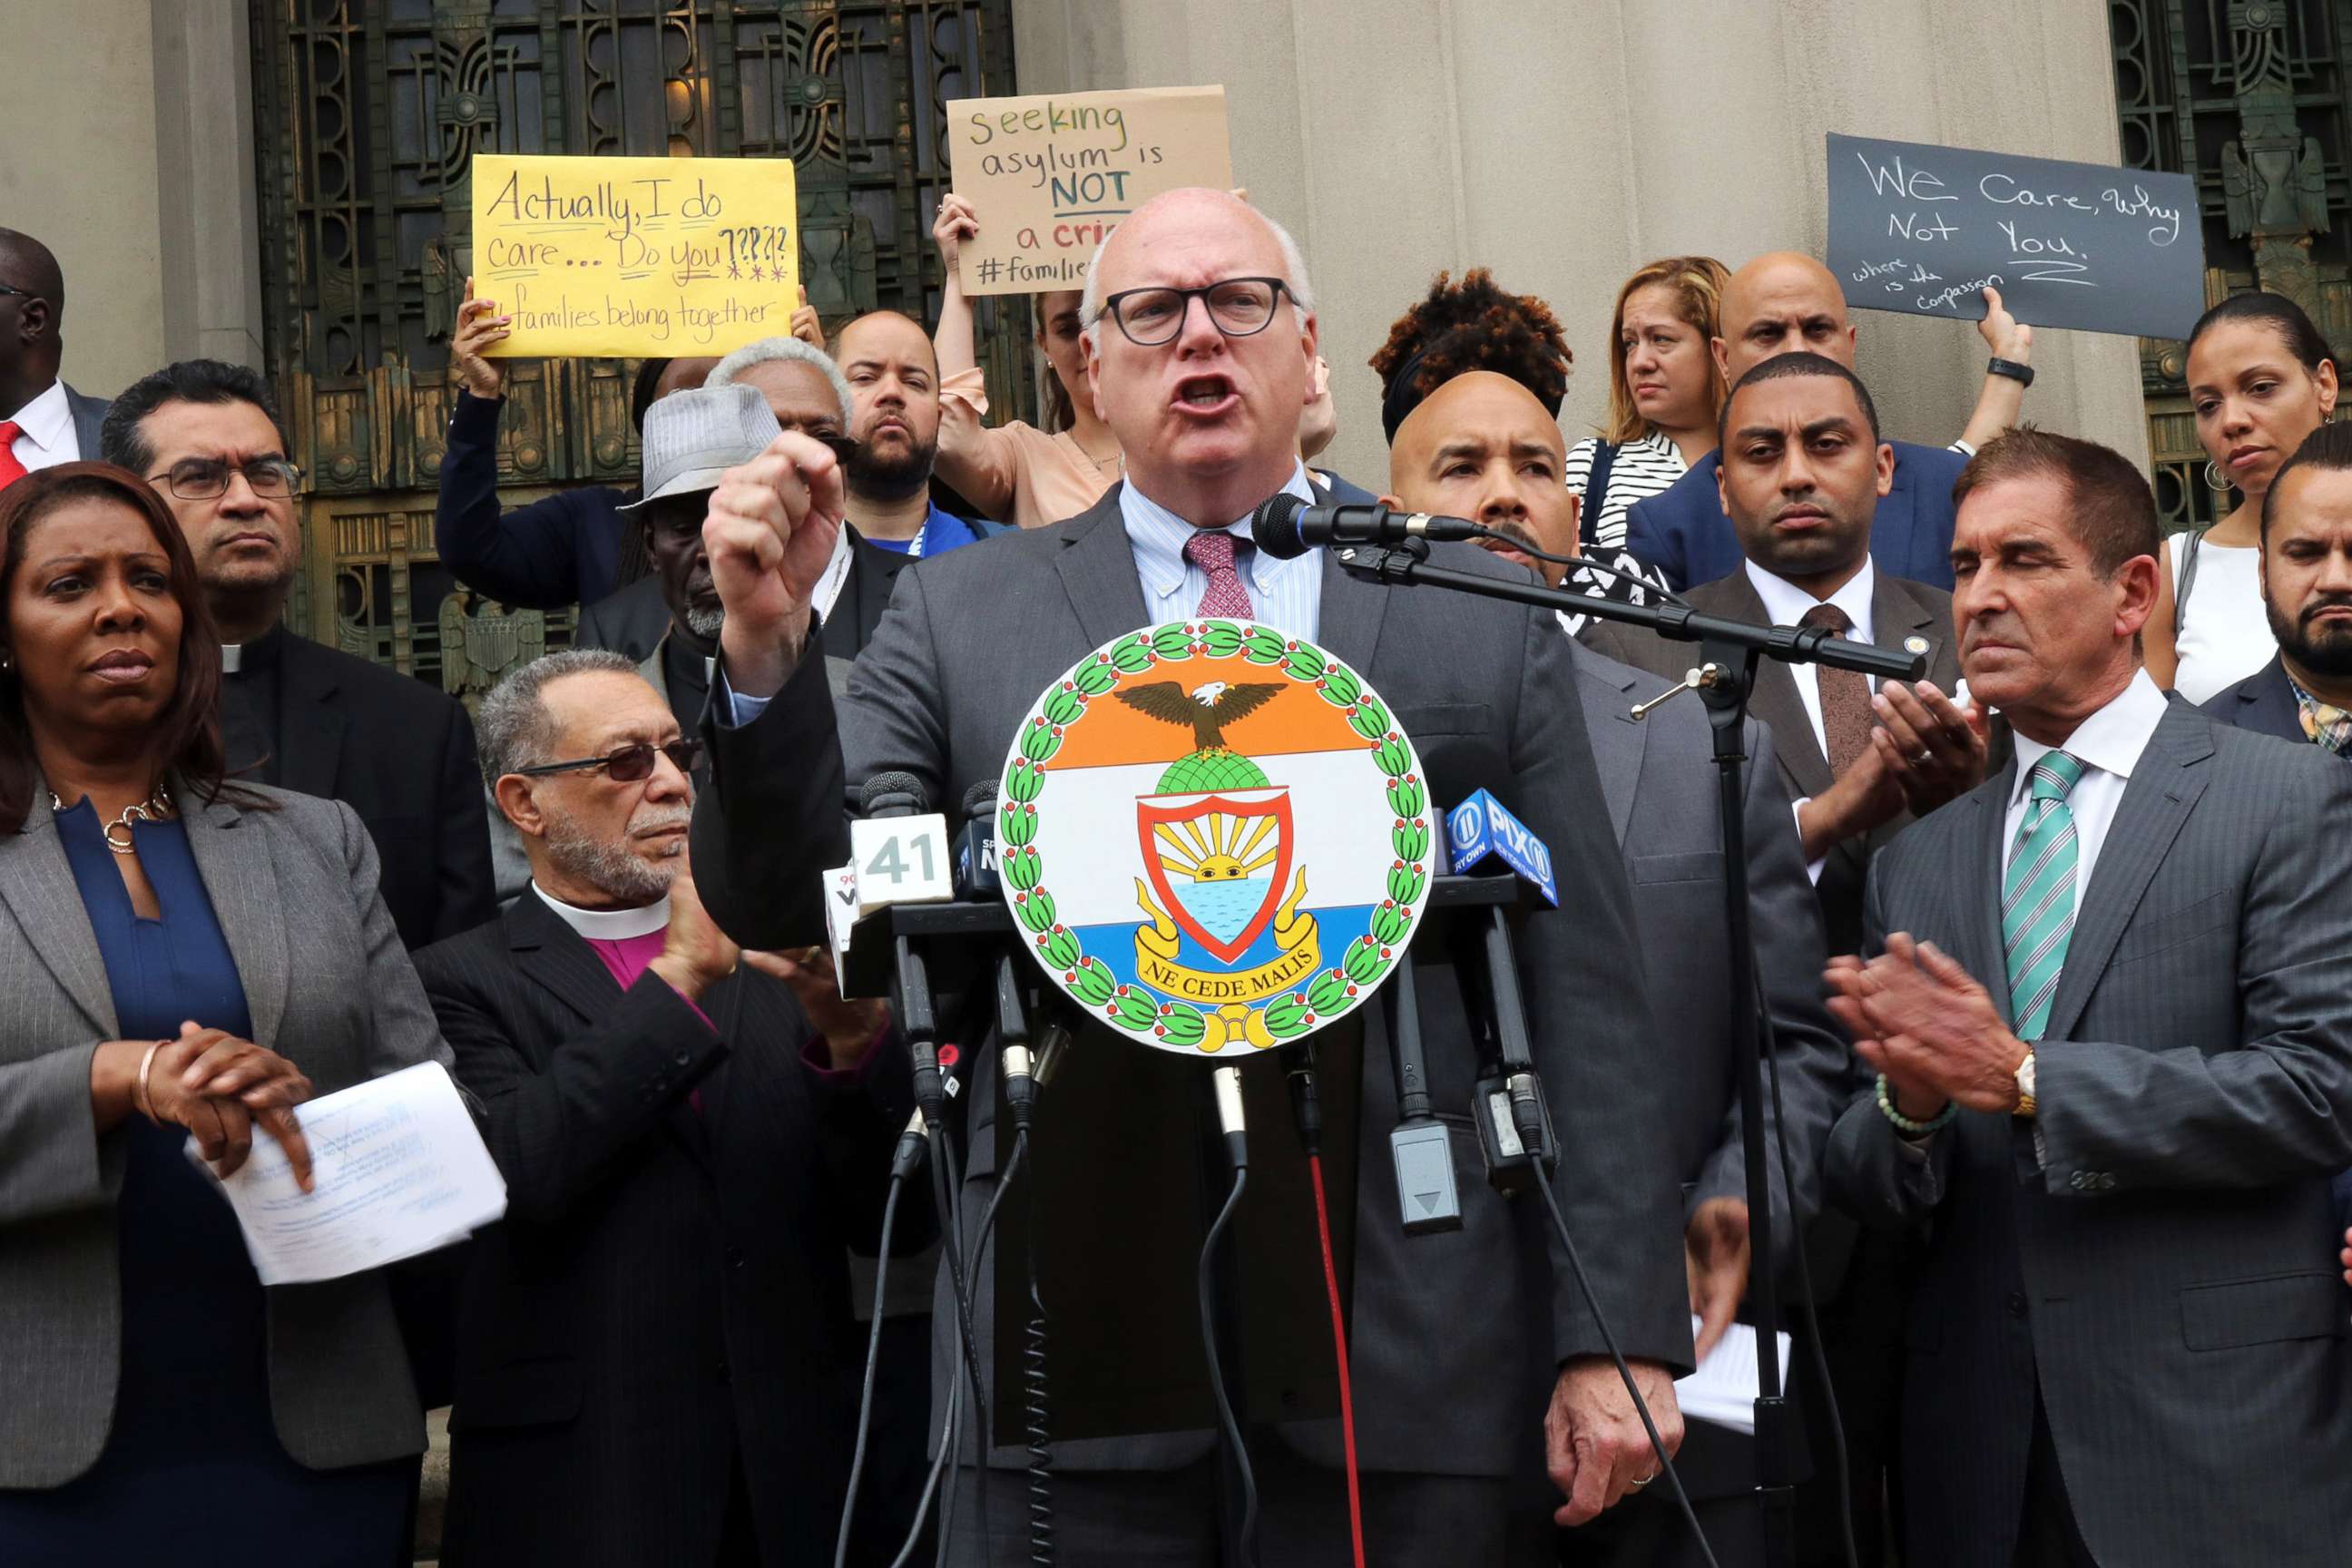 PHOTO: Congressman Joe Crowley addresses the audience at a prayer vigil and rally on immigration on June 22, 2018, in the Bronx borough of New York City.